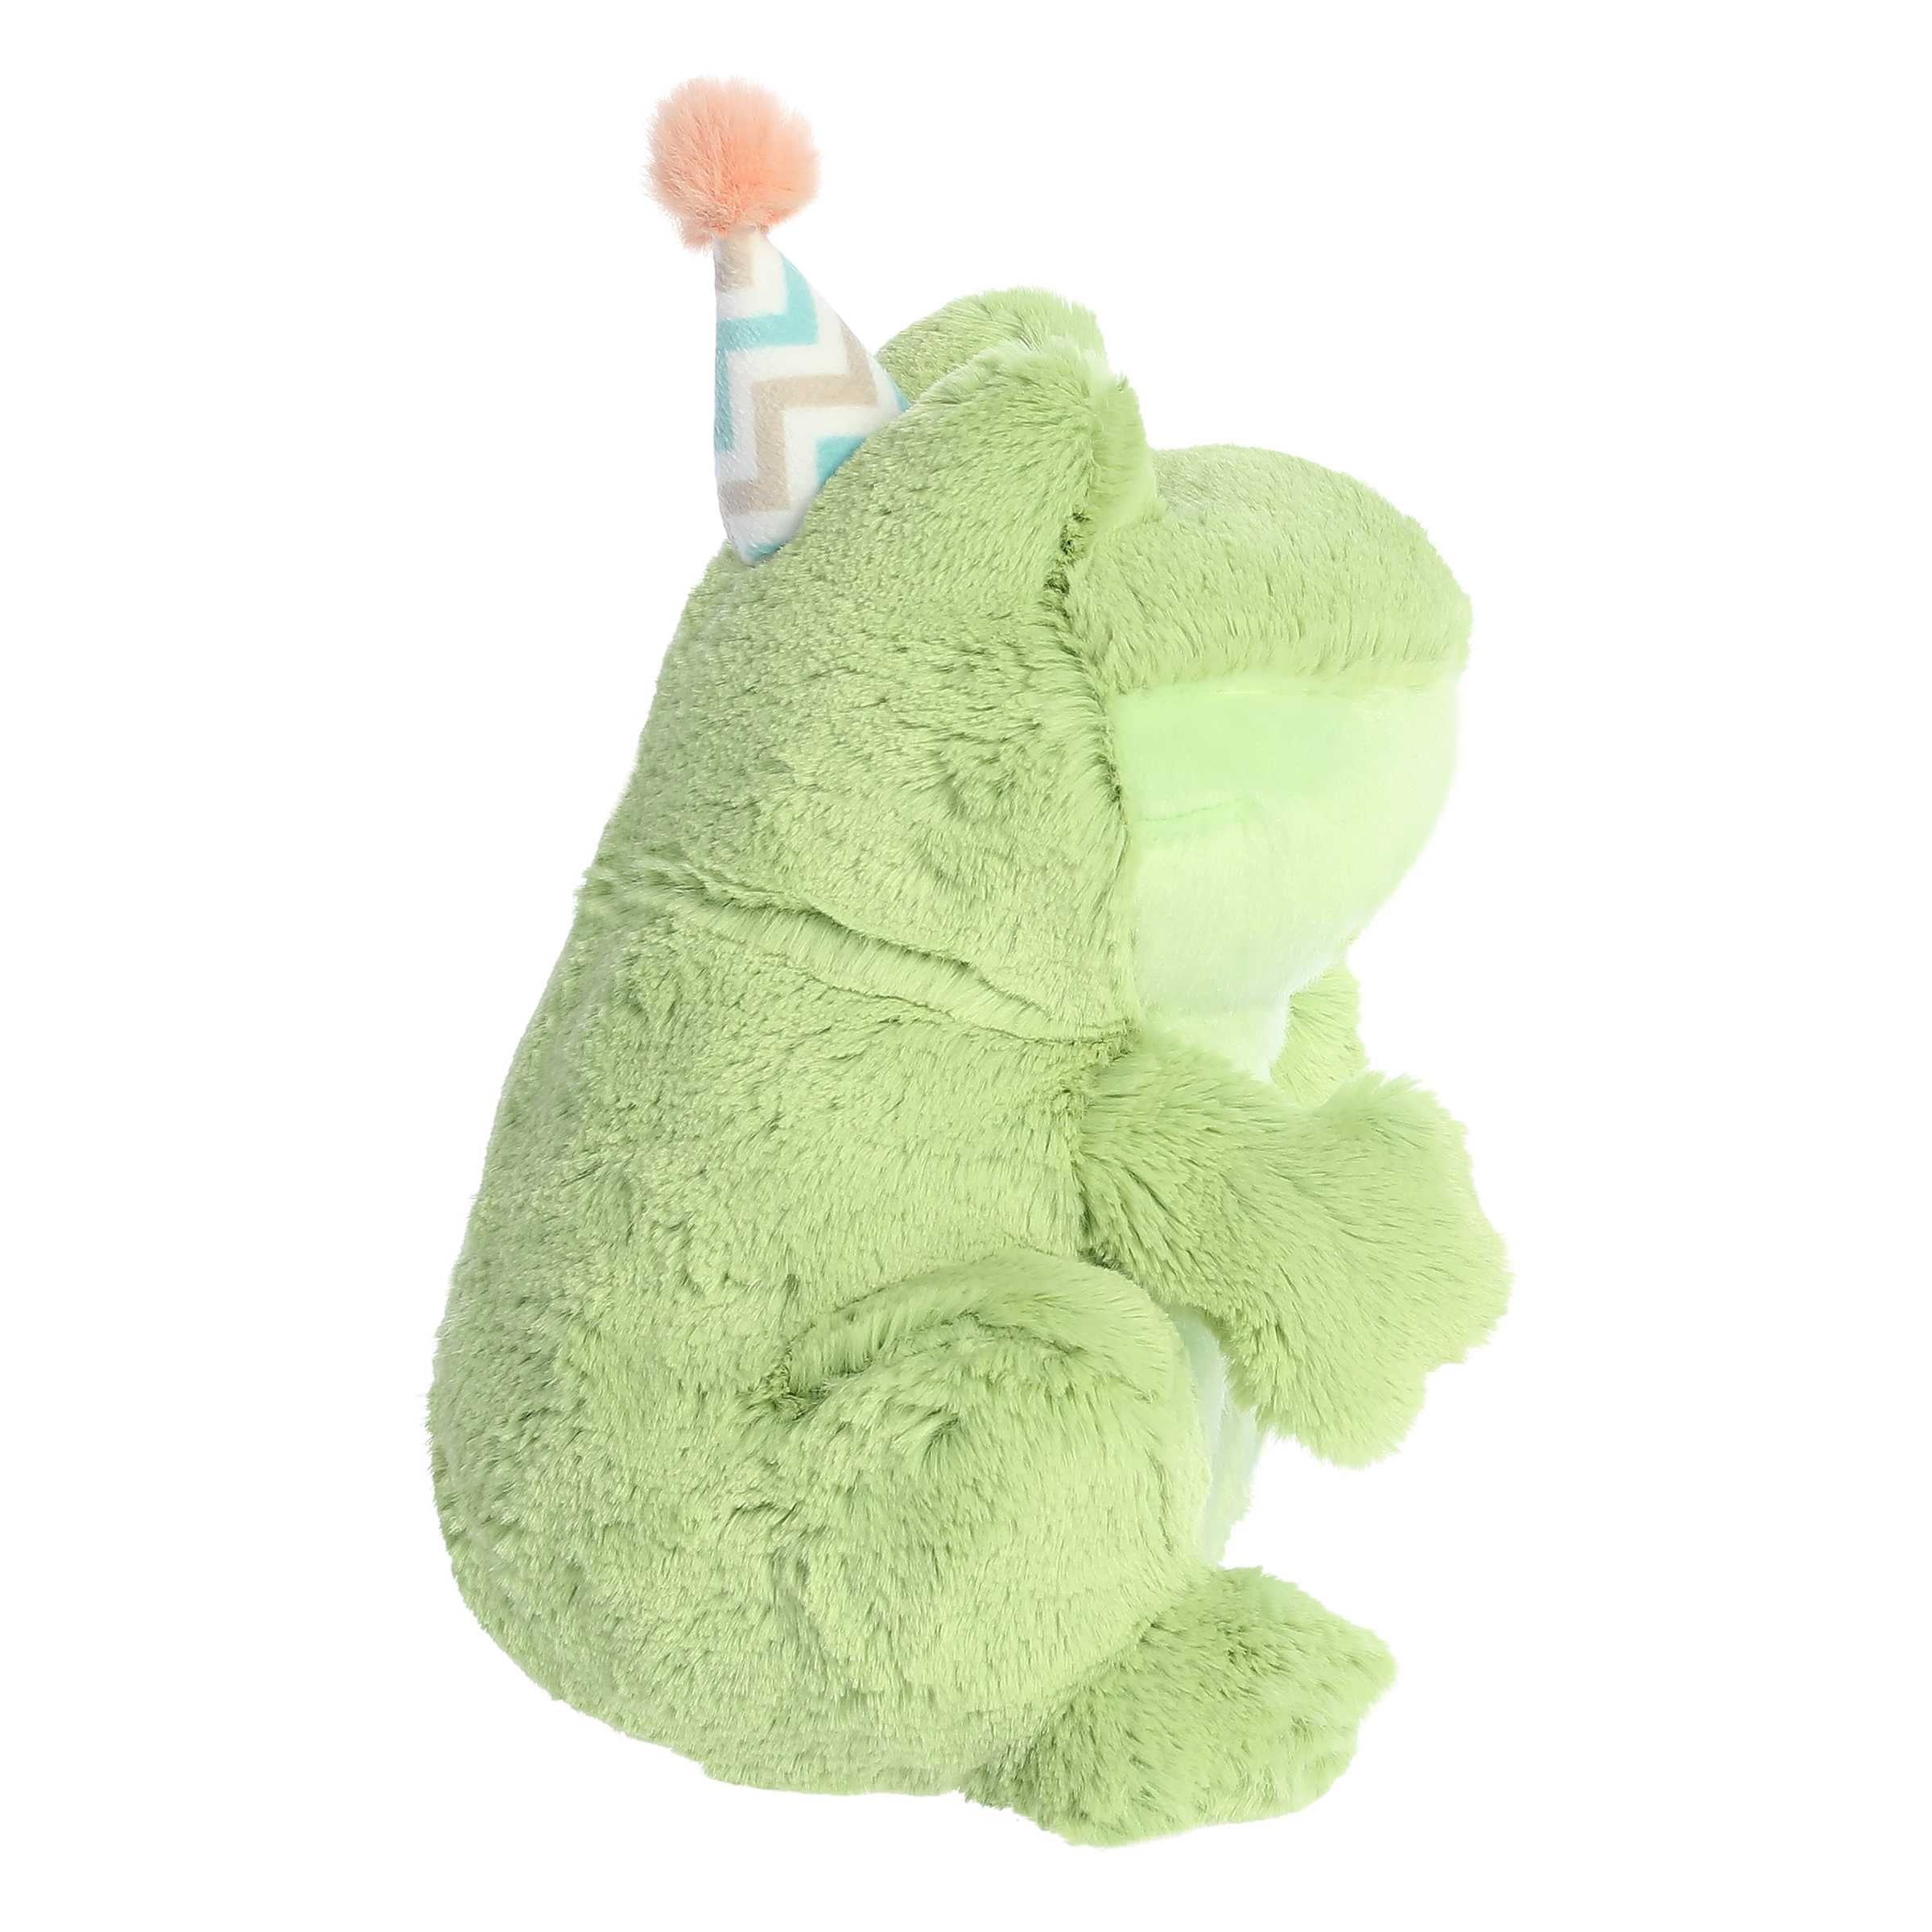 Aurora® - JUST SAYIN'™ - 10" Toad-Ally Awesome Birthday™